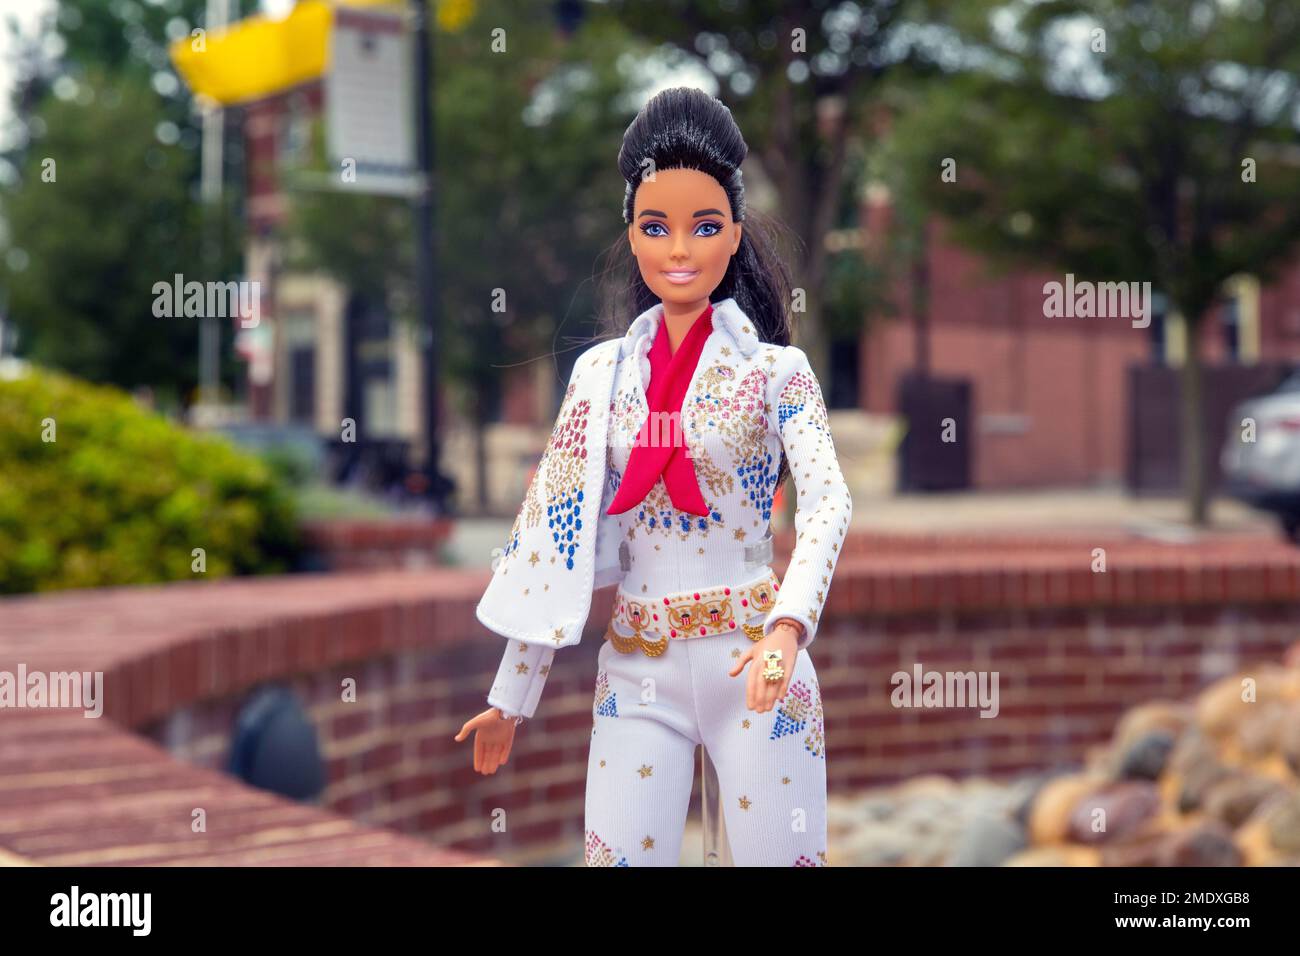 An Elvis Presley Barbie doll is seen in East Rutherford, New Jersey, on  Tuesday, August 10, 2021. The new Barbie doll goes on sale on Wedneesday.  The toy maker says the outfit